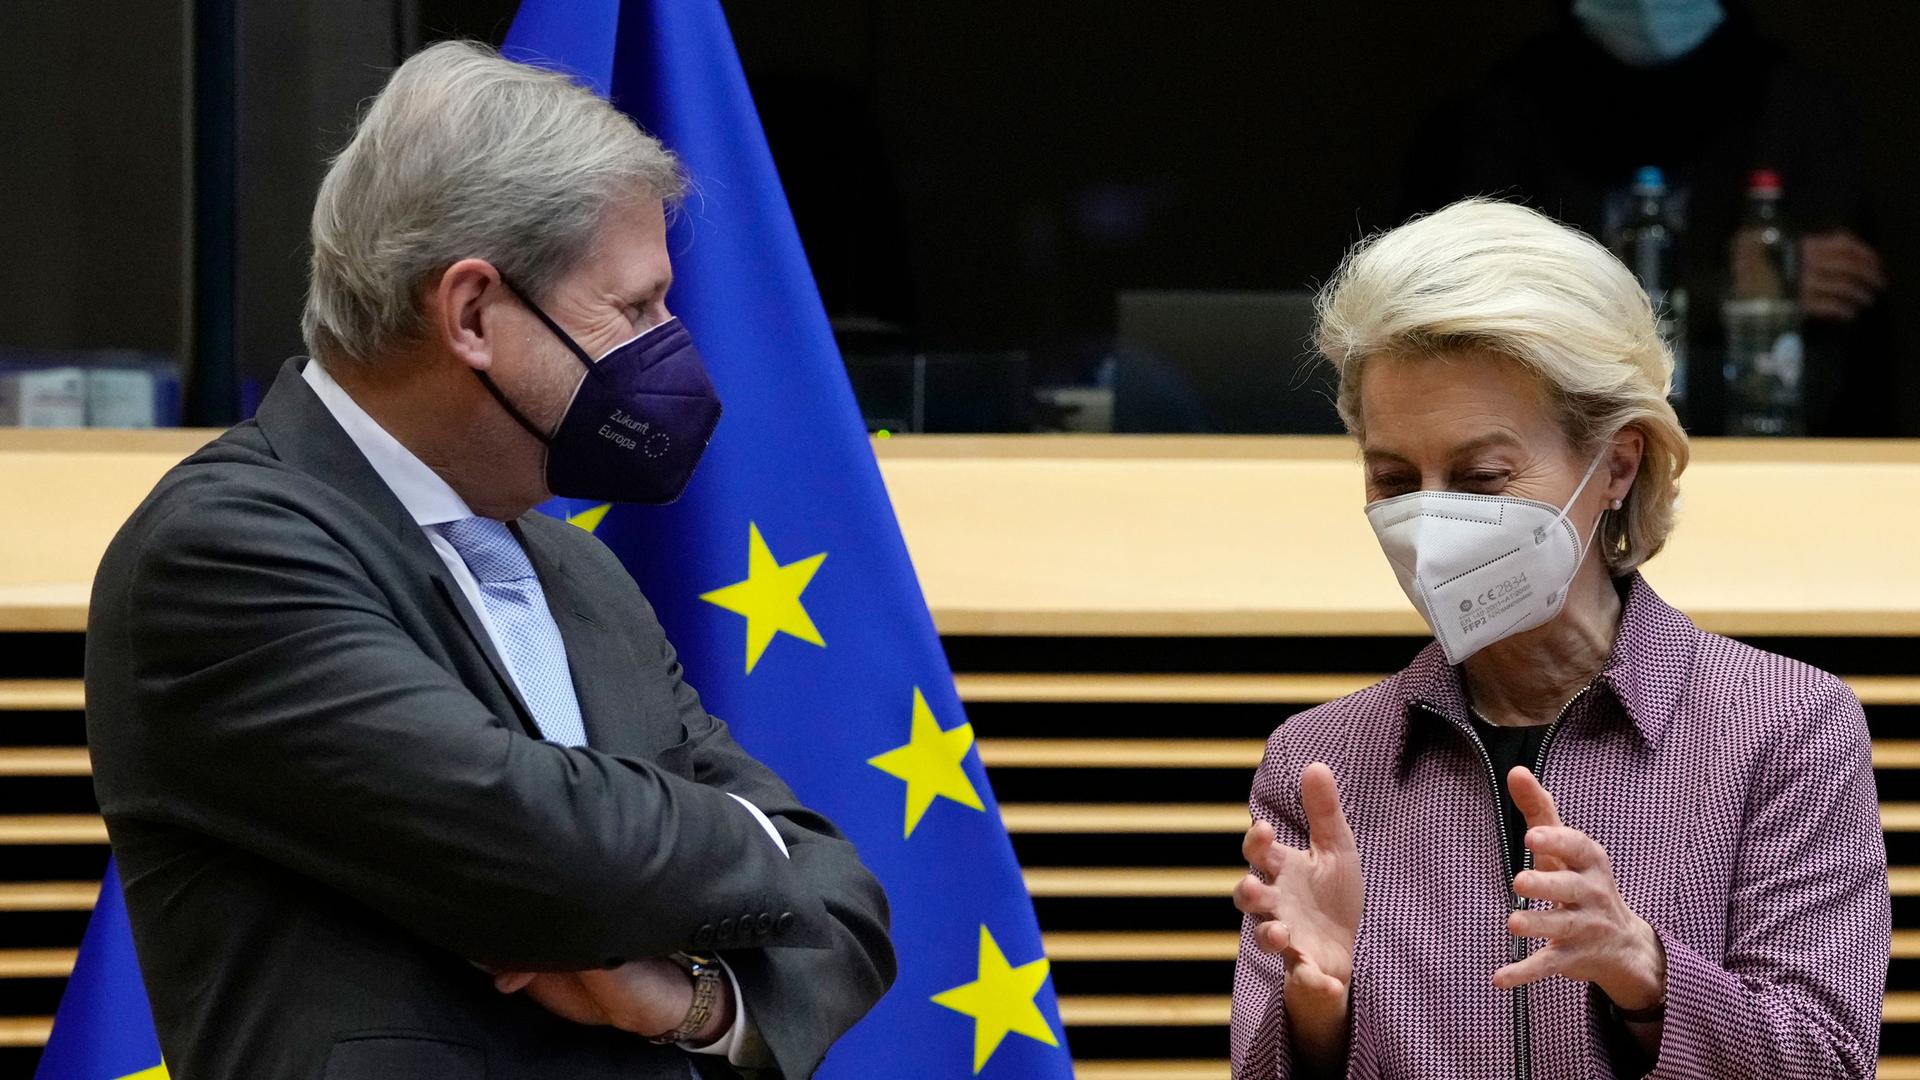 European Commission President Ursula von der Leyen, right, speaks with European Commissioner for Budget and Administration Johannes Hahn during a meeting of the College of Commissioners at EU headquarters in Brussels on Wednesday, Dec. 22, 2021. 